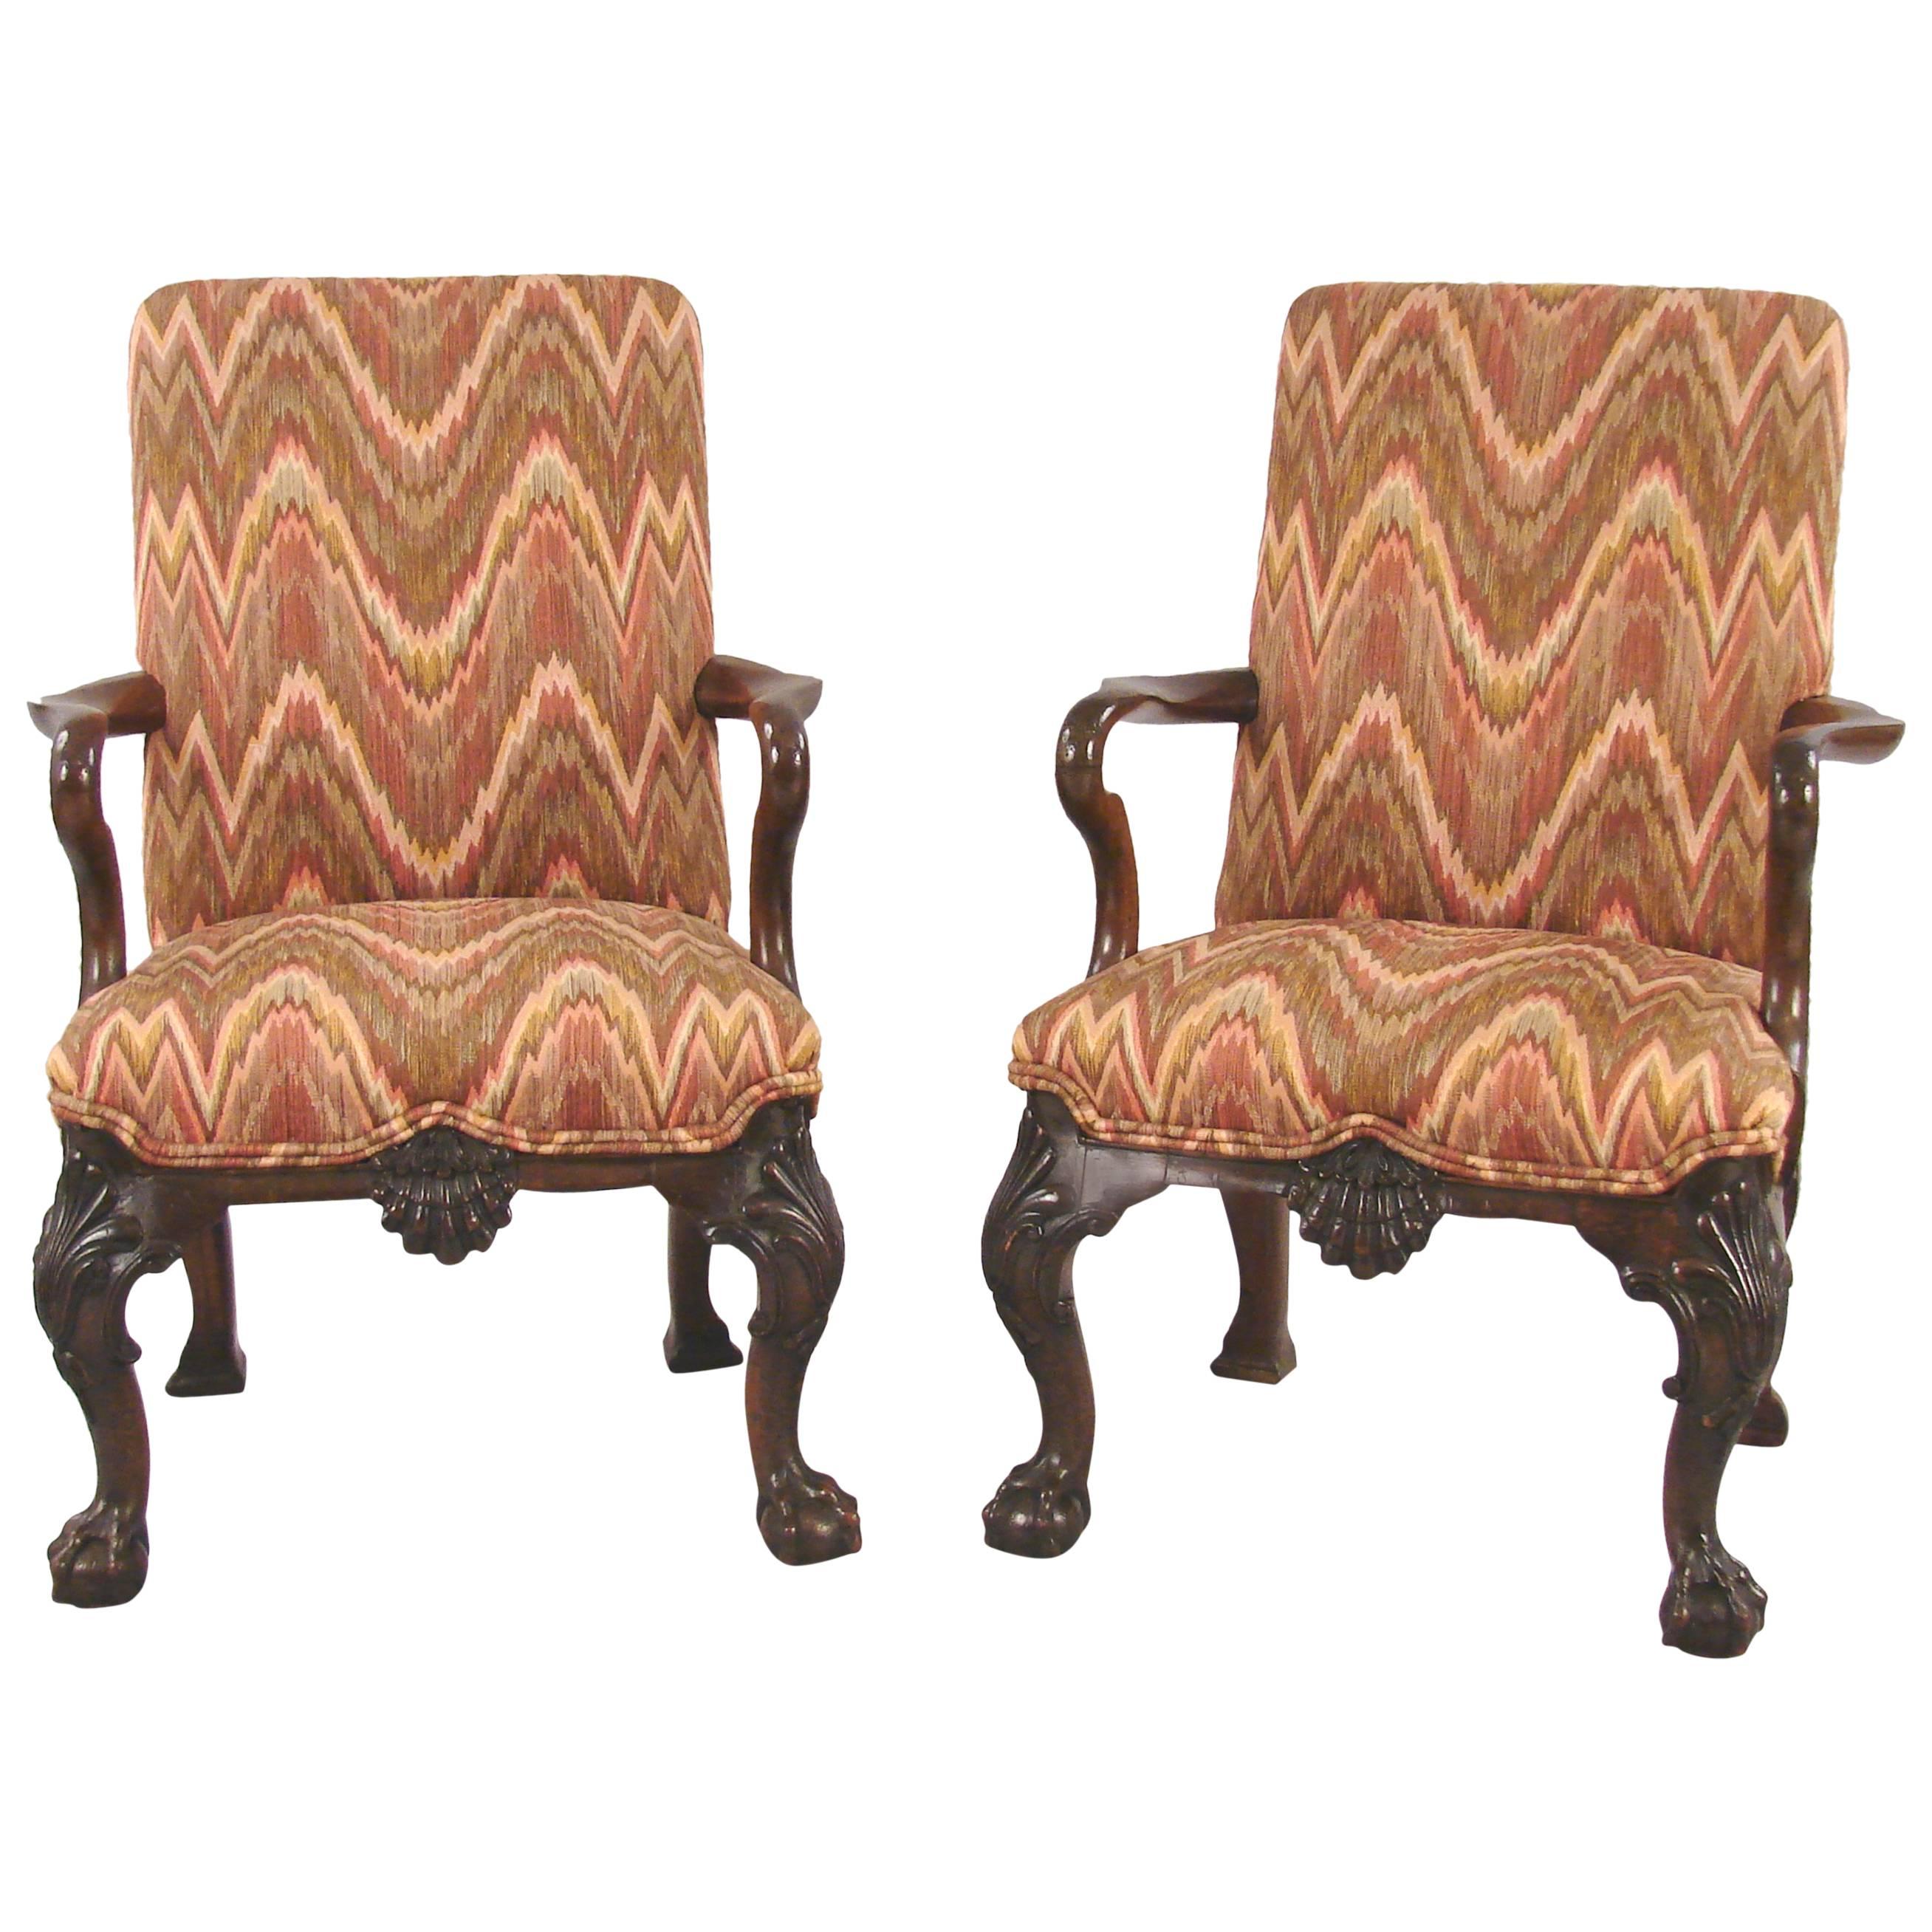 Fine Pair of George II Style Mahogany Child's Chairs